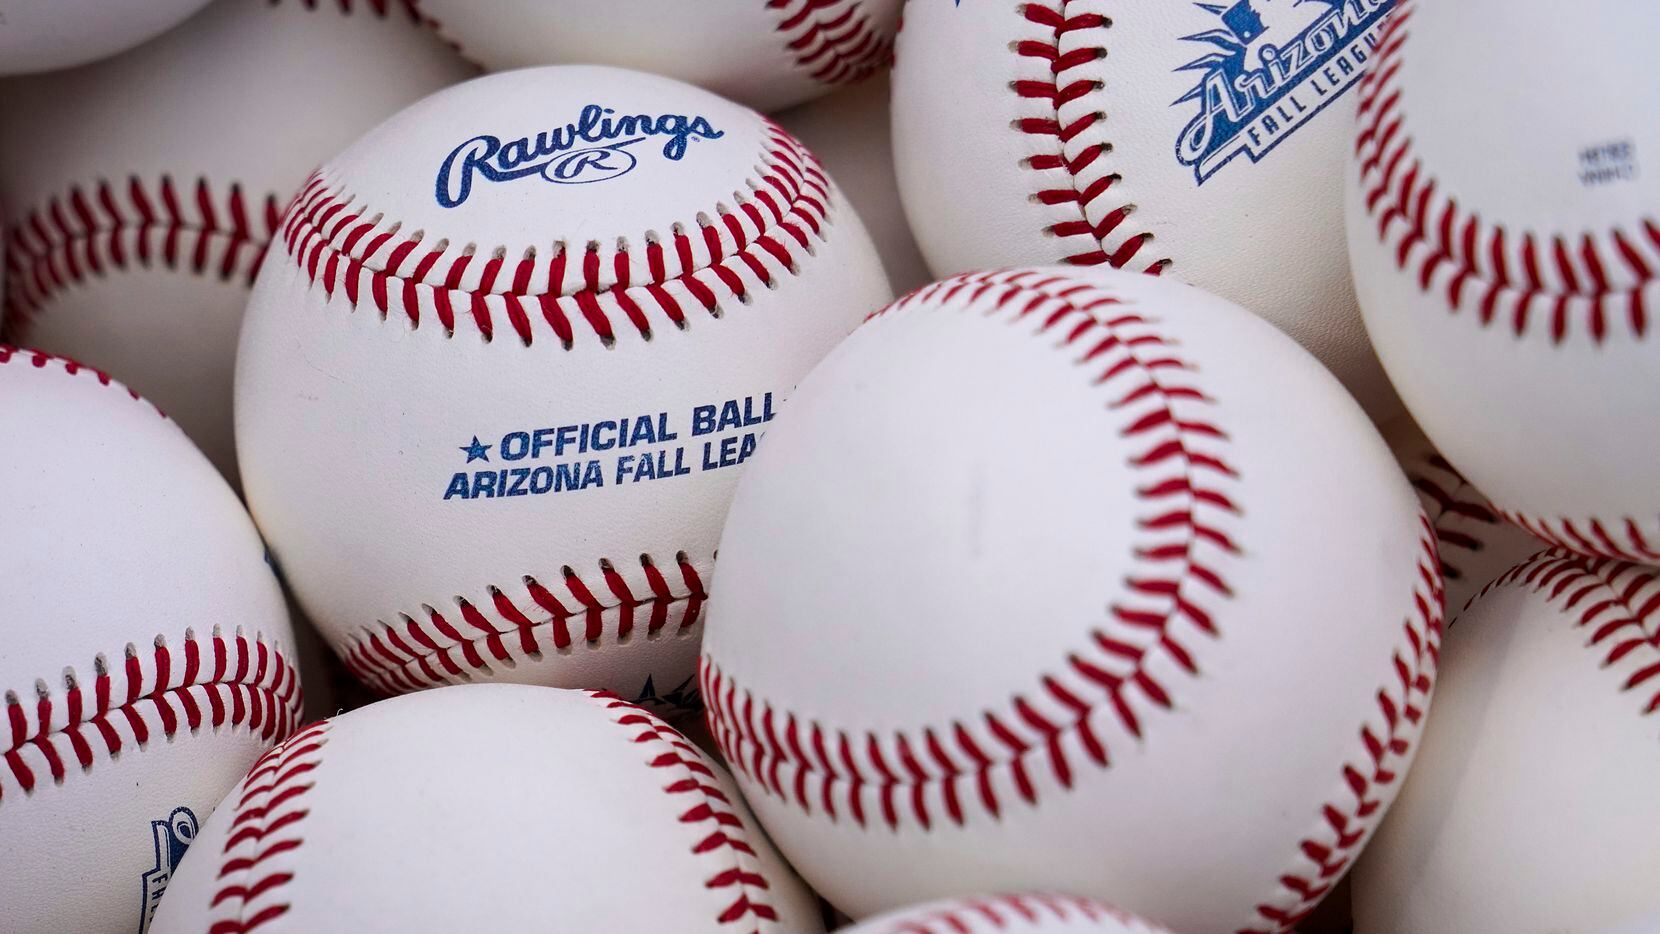 A basket of Arizona Fall League balls sits ready for a practice drill during a Texas Rangers...